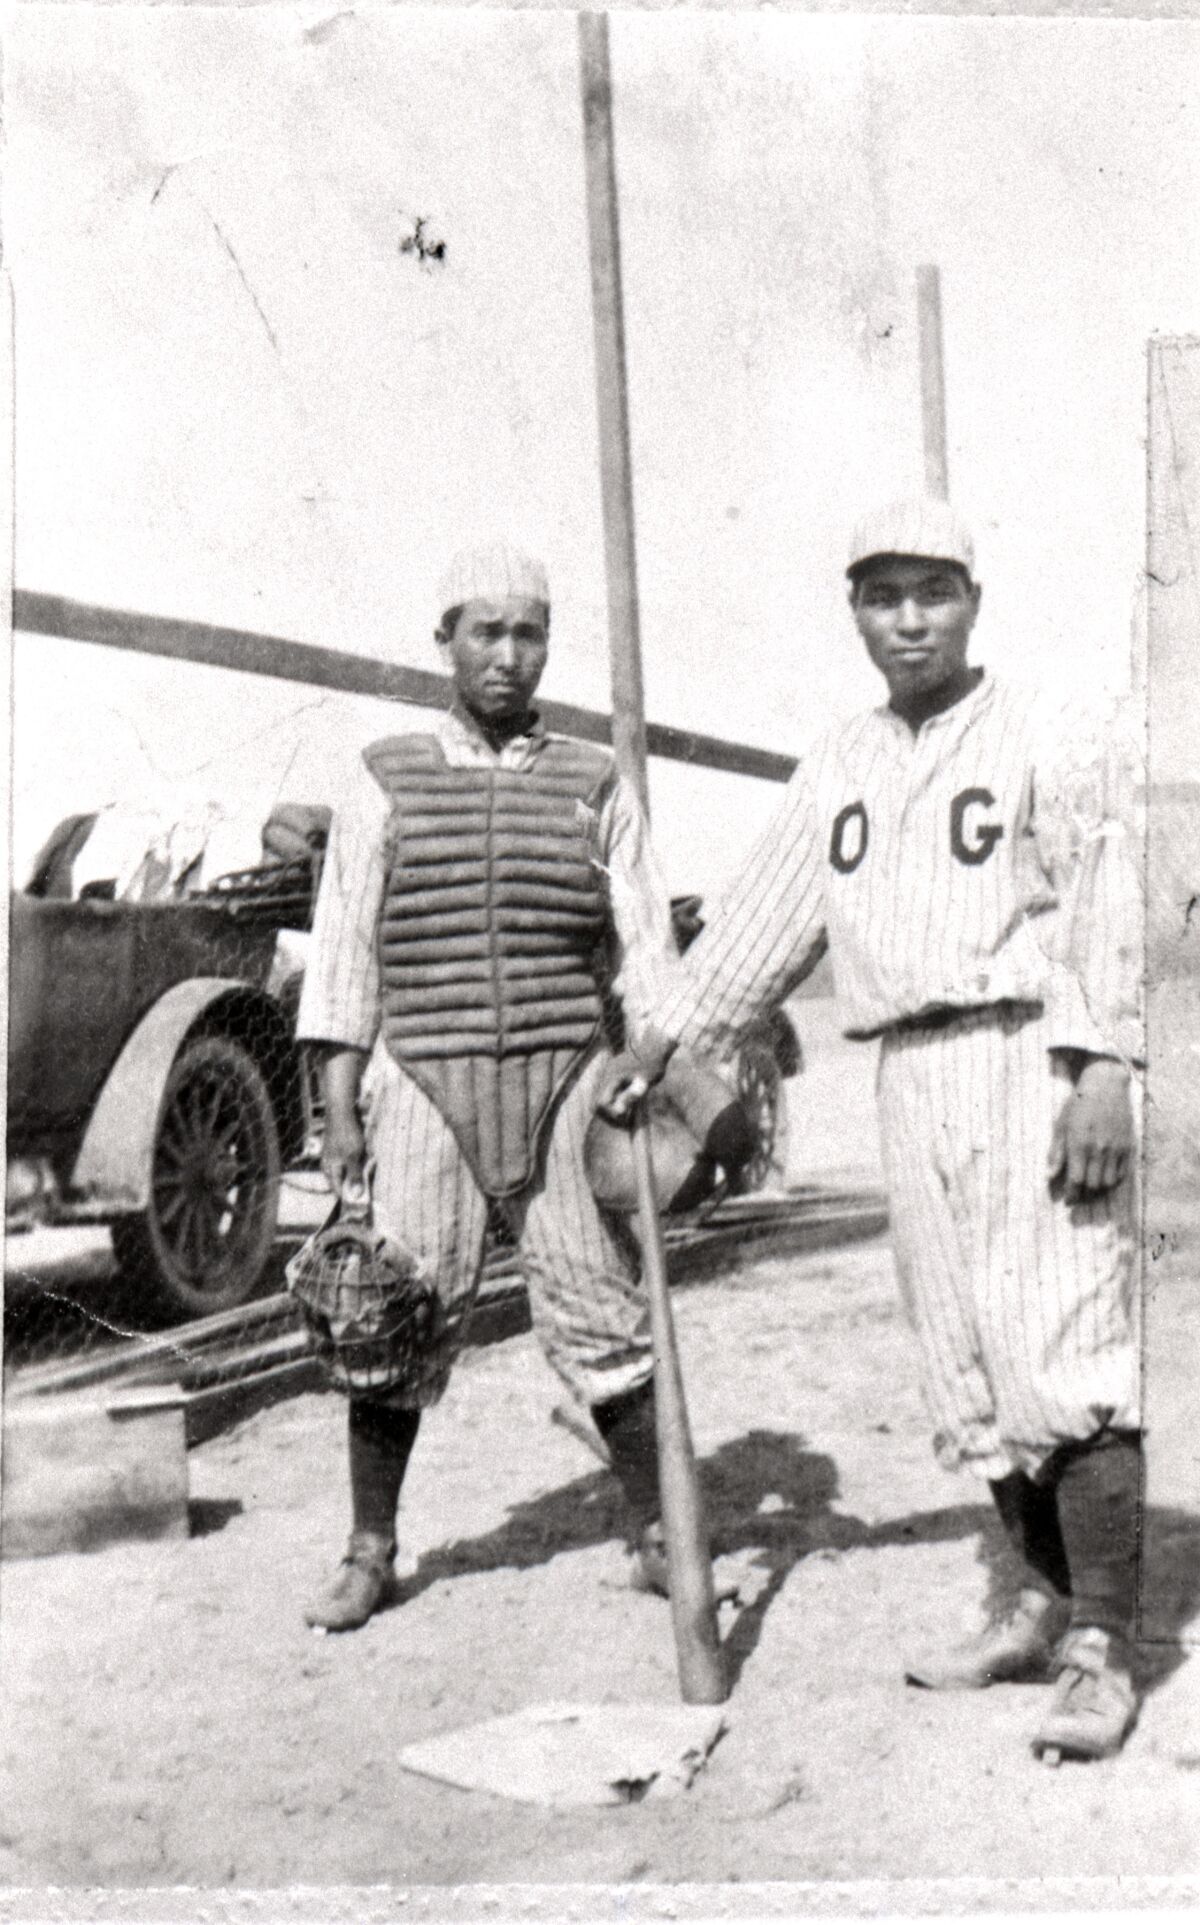 Bonshichi Yoshimura and Masami Fujino, two Japanese American players for the Orange Groves in the 1920s.